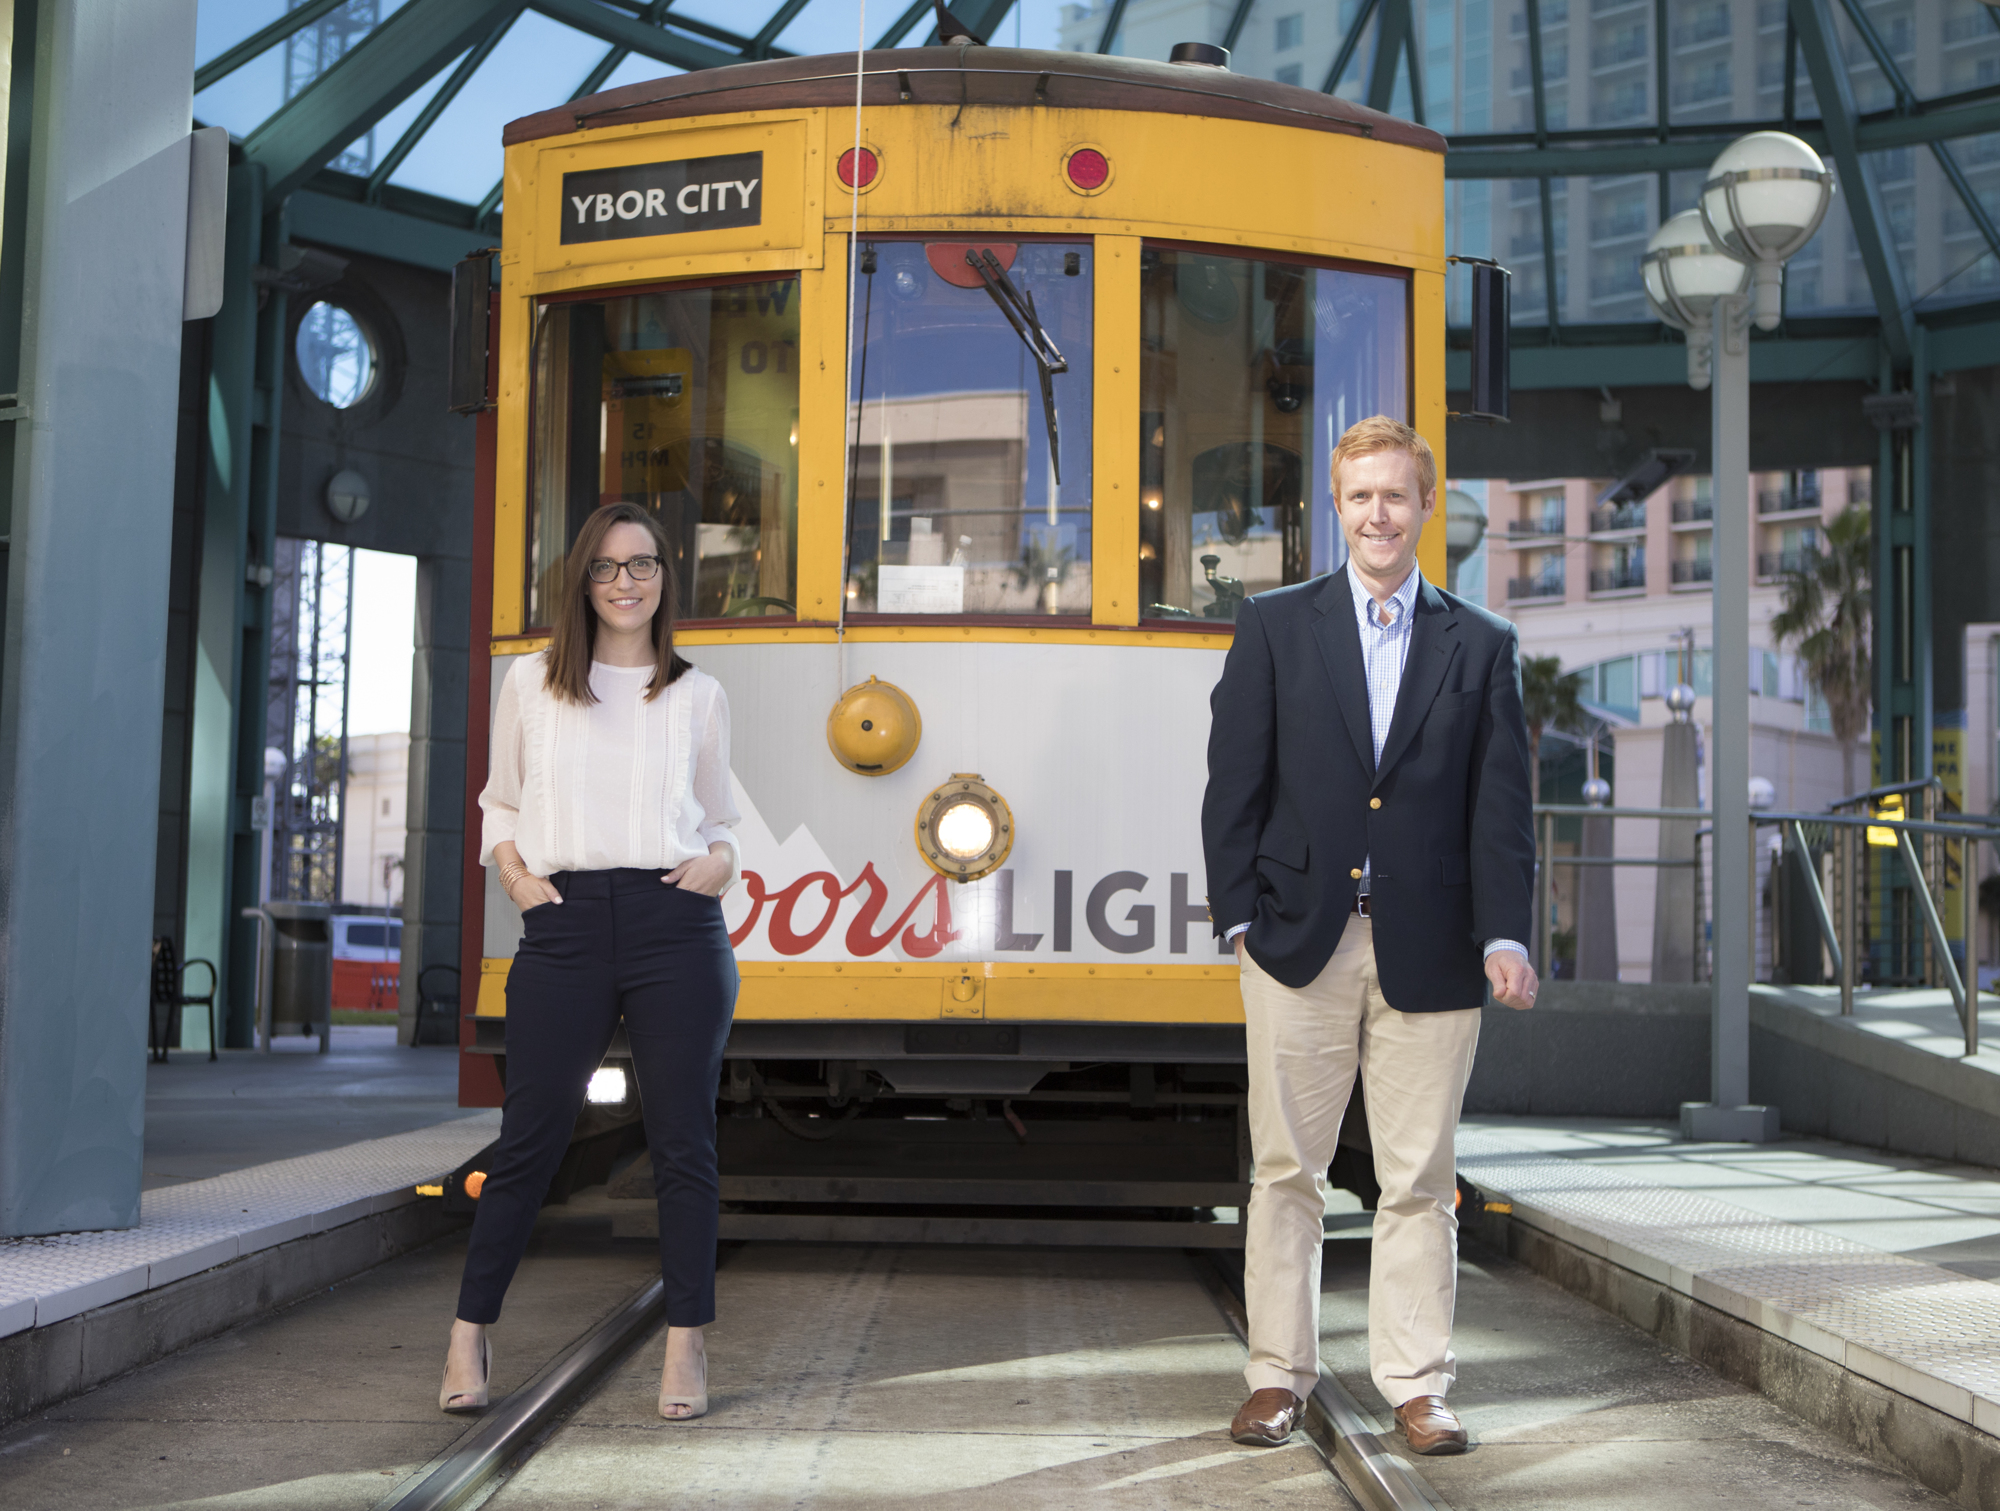 Mark Wemple. Tyler Hudson and Christina Barker, pictured here at the TECO Line Streetcar statioin downtown Tampa, helped win passage of a sales-tax increase to fund transportation improvements in Hillsborough County.